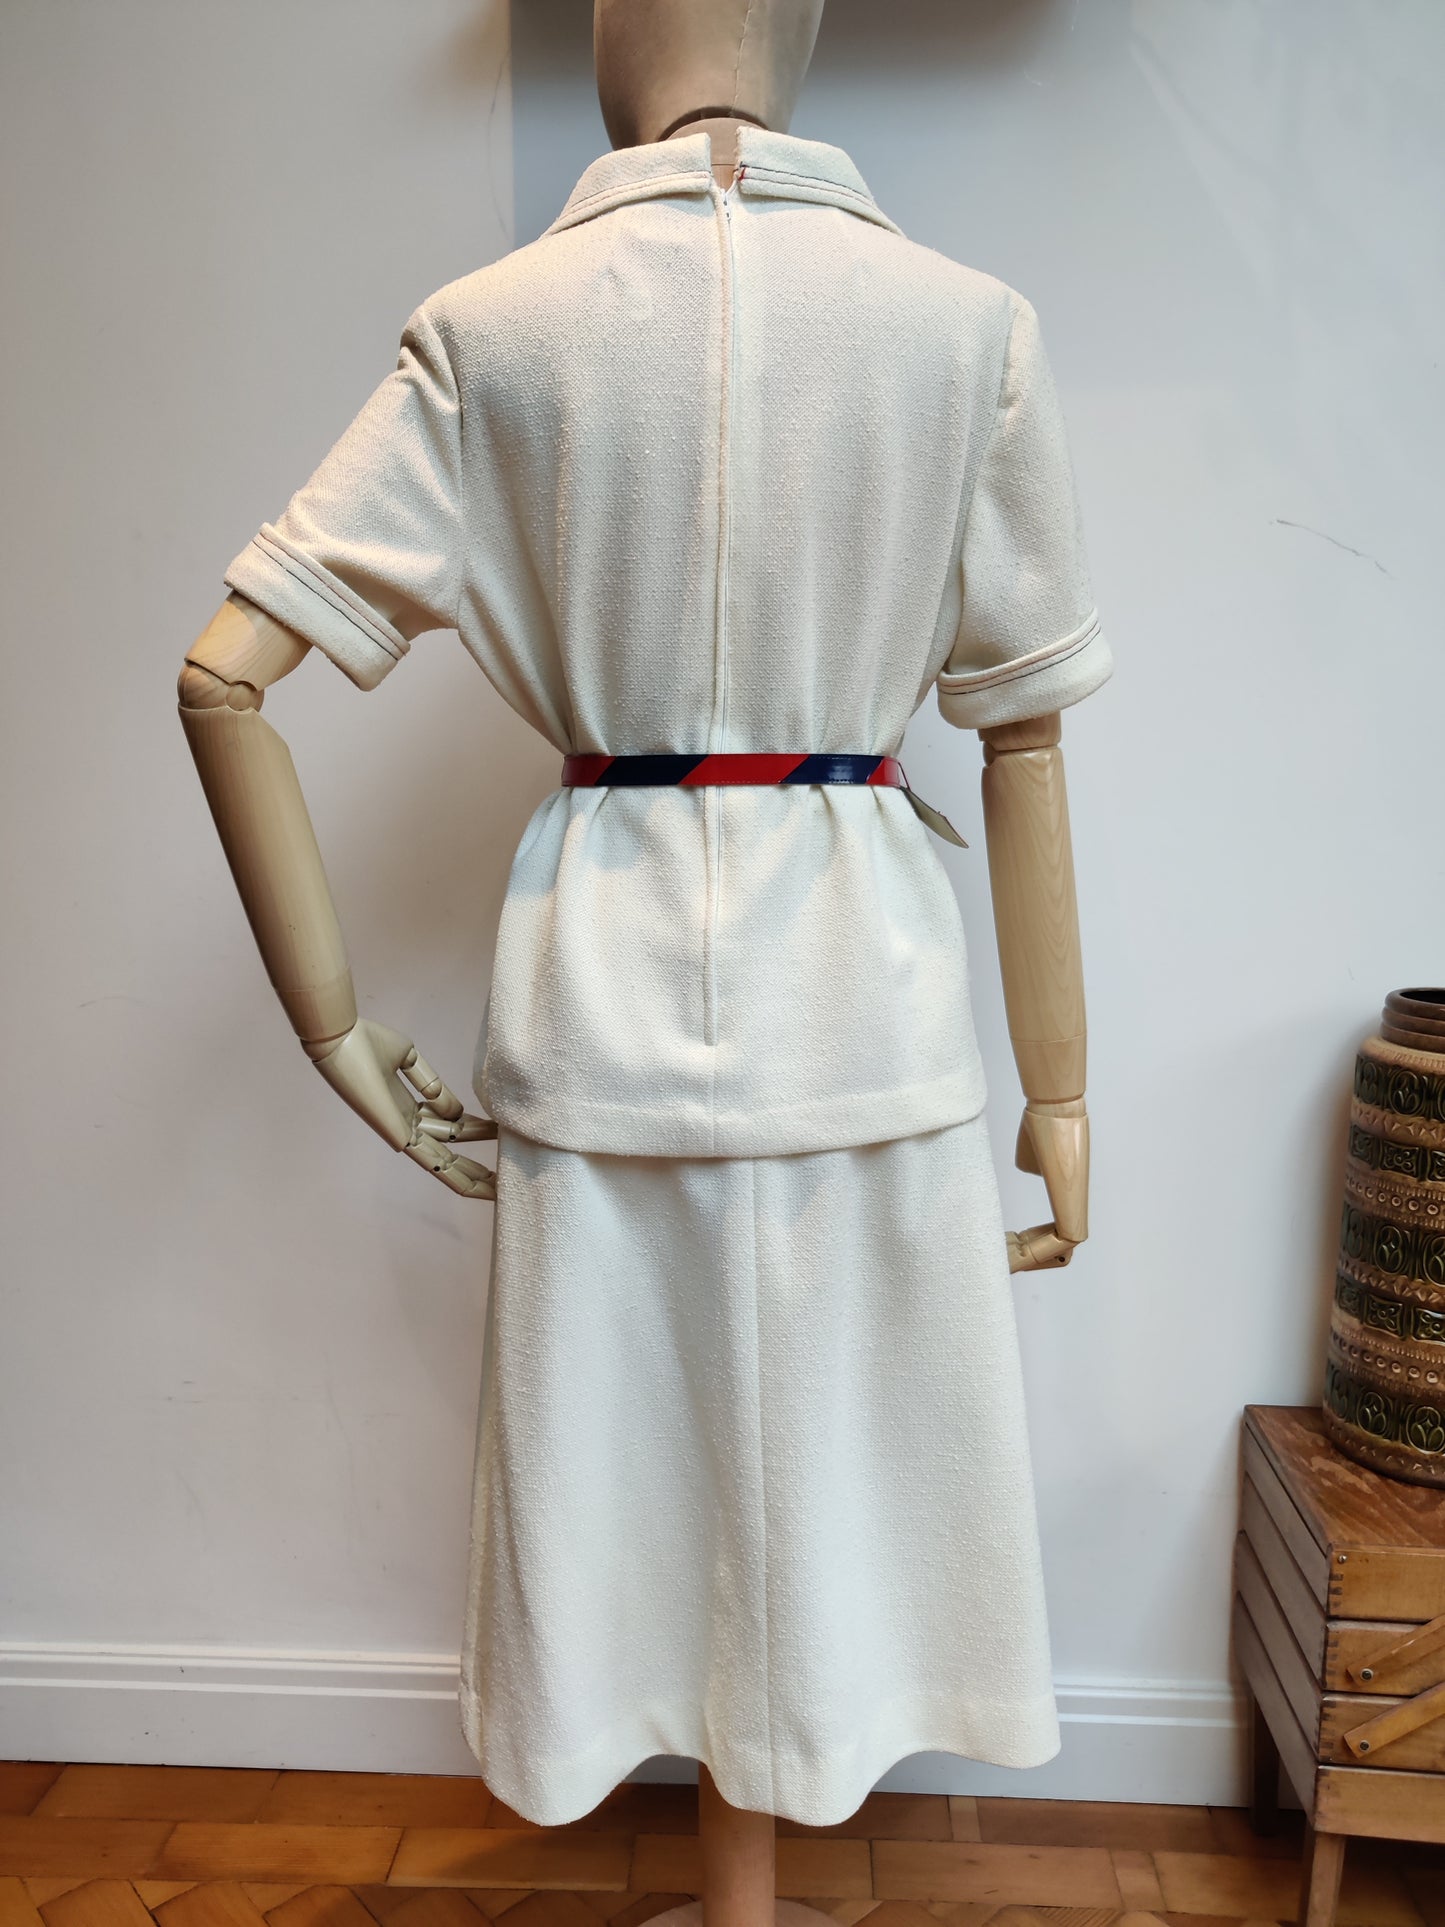 70's short sleeve top with matching skirt and belt